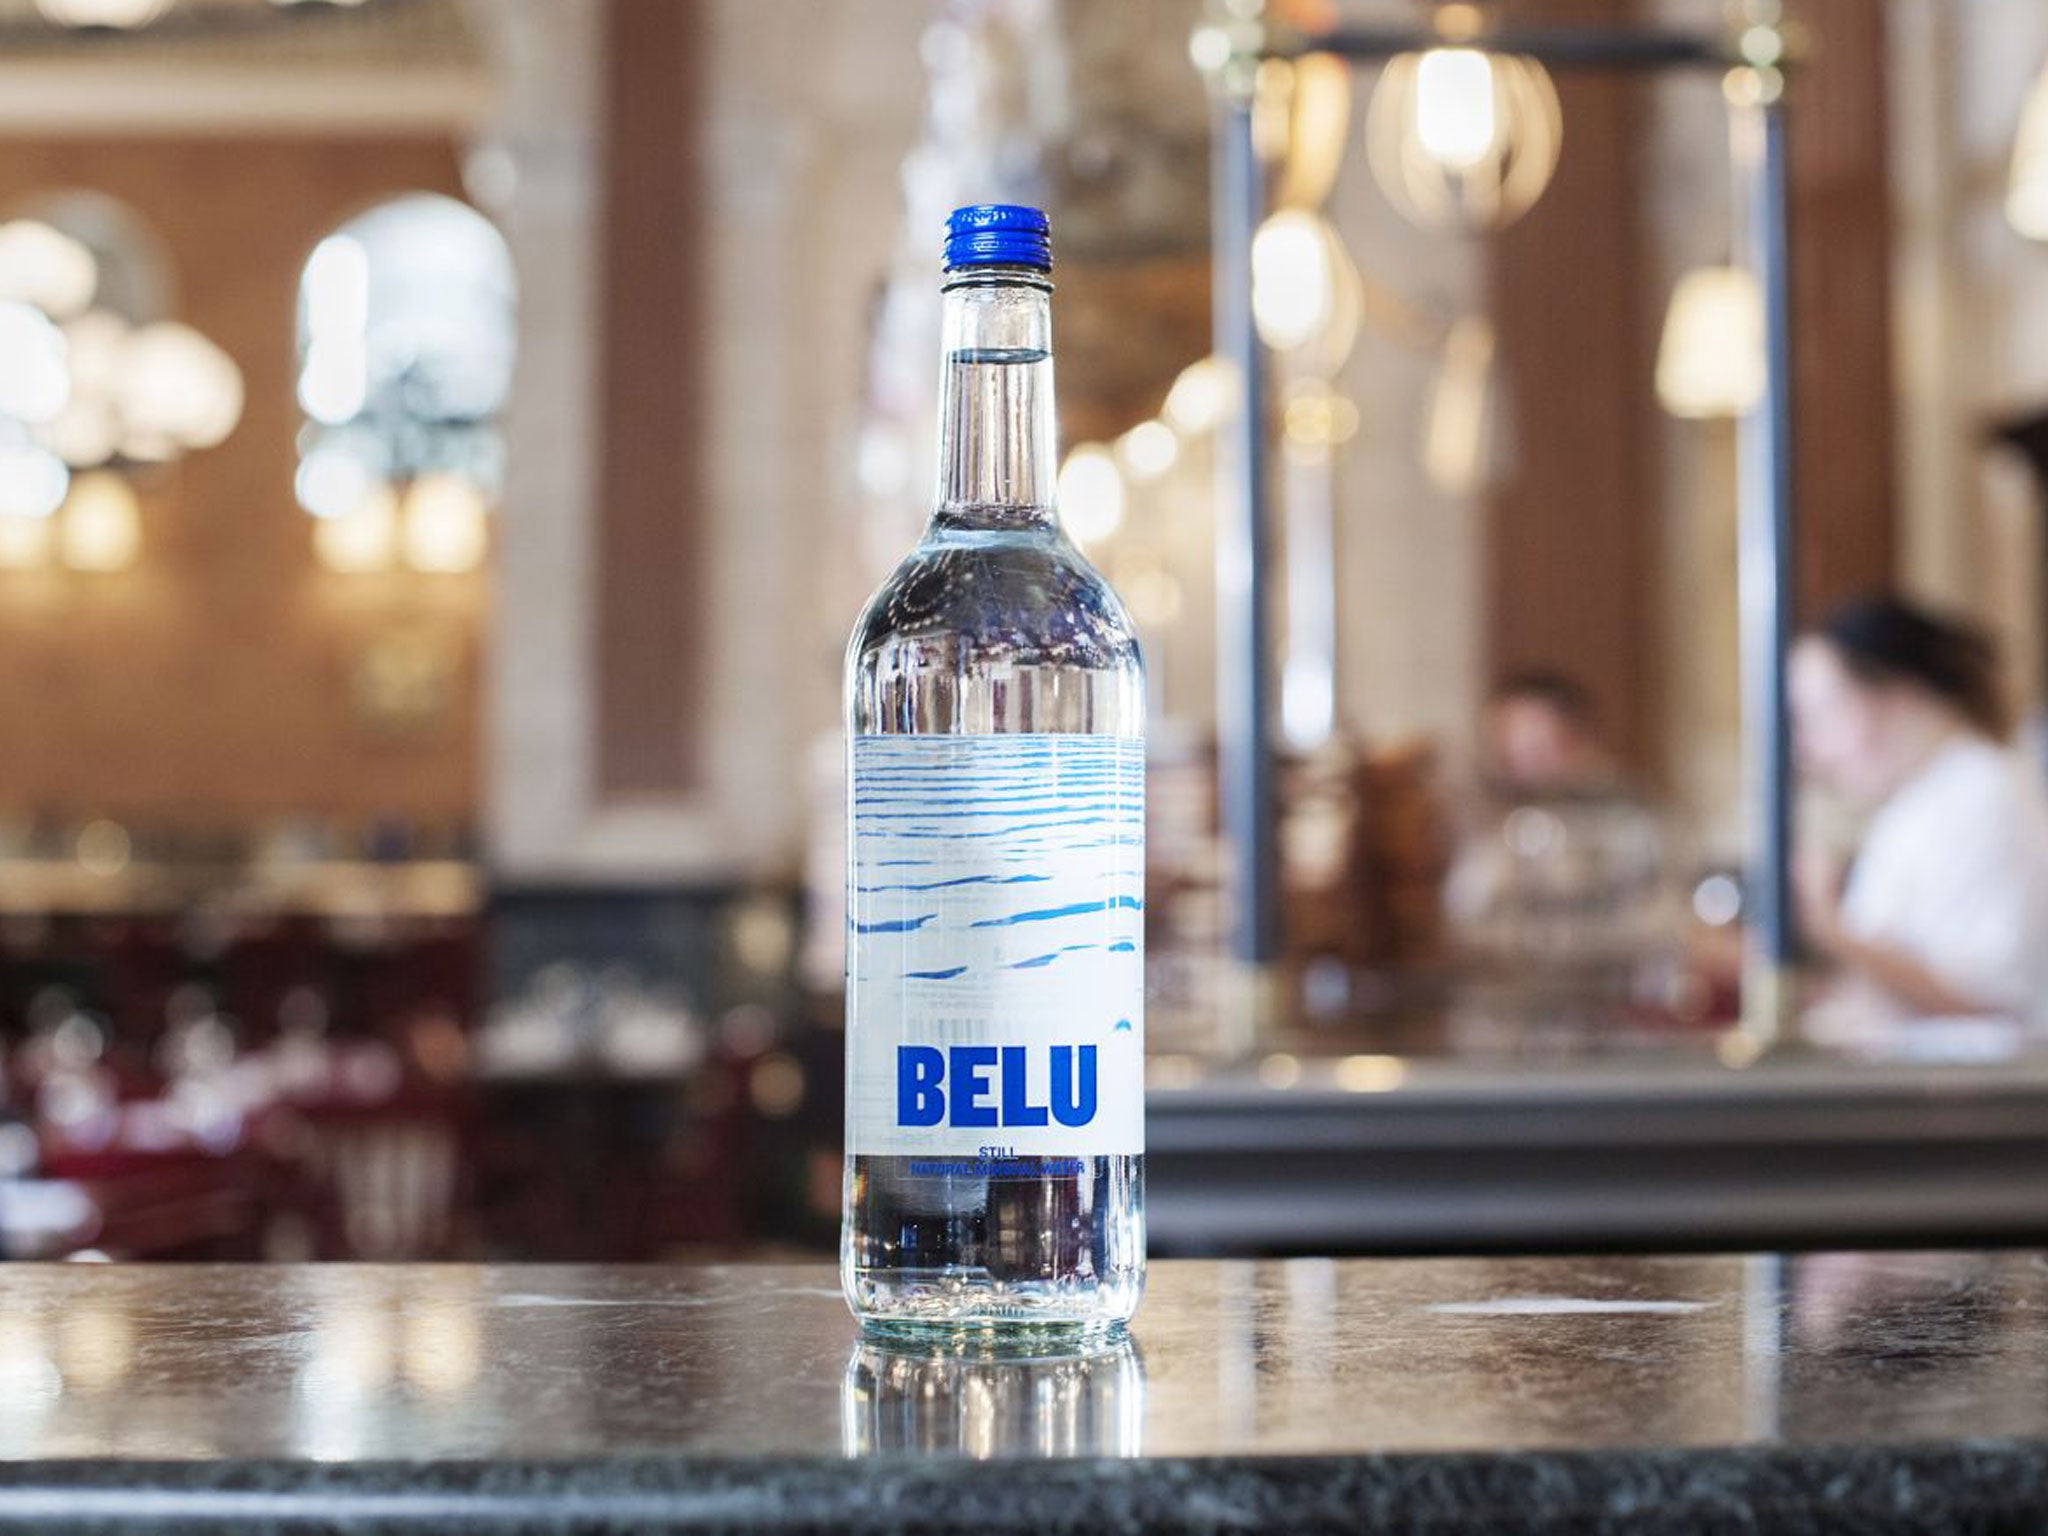 Belu will be supplying water to the Commons and Lords from September